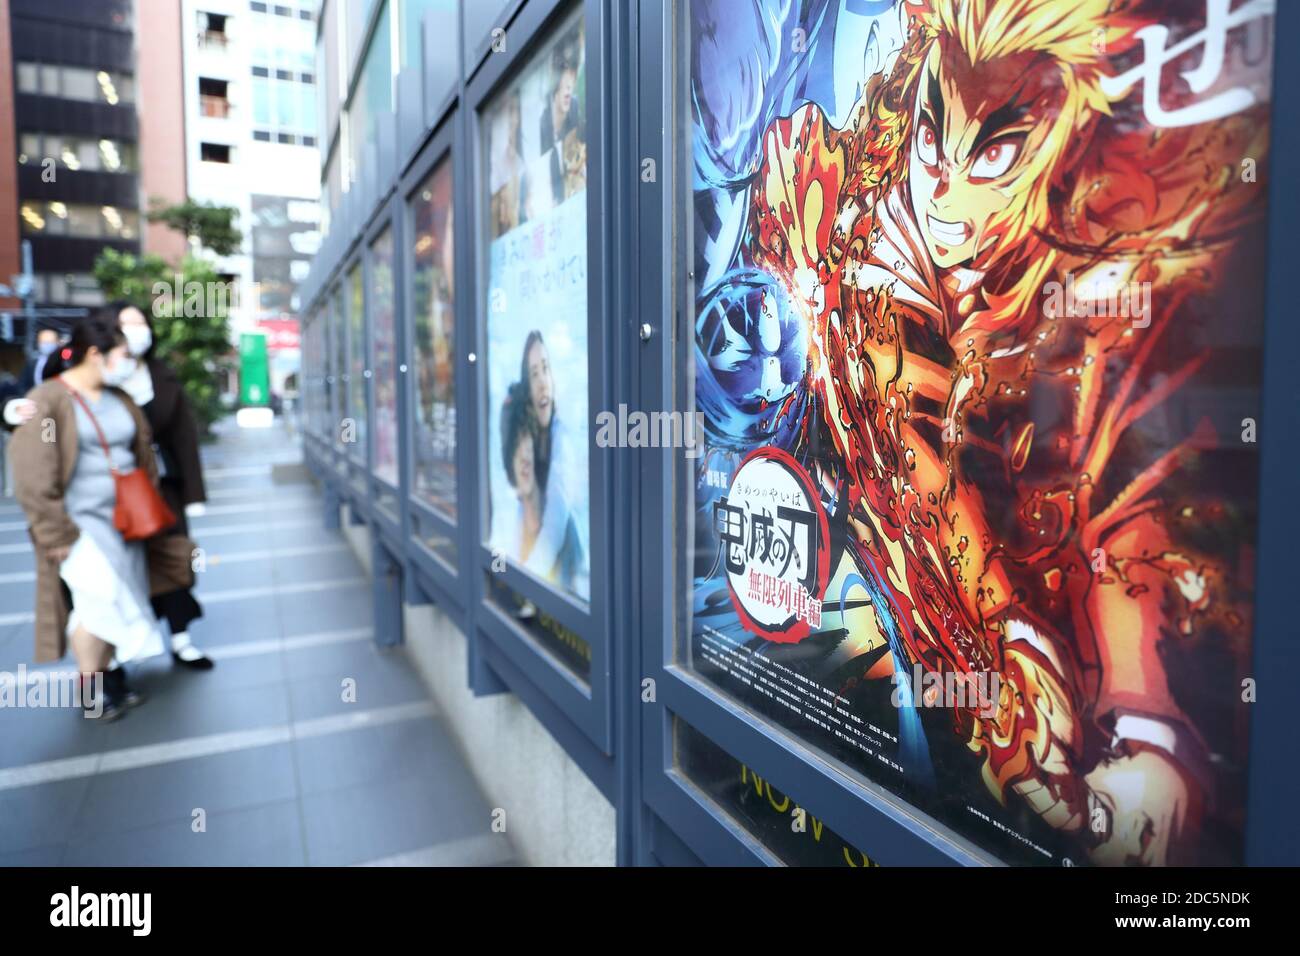 People Walk Past A Poster For An Animated Film Based On Popular Japanese Manga Demon Slayer Kimetsu No Yaiba The Movie Infinite Train On Display Outside A Movie Theater In Tokyo Japan